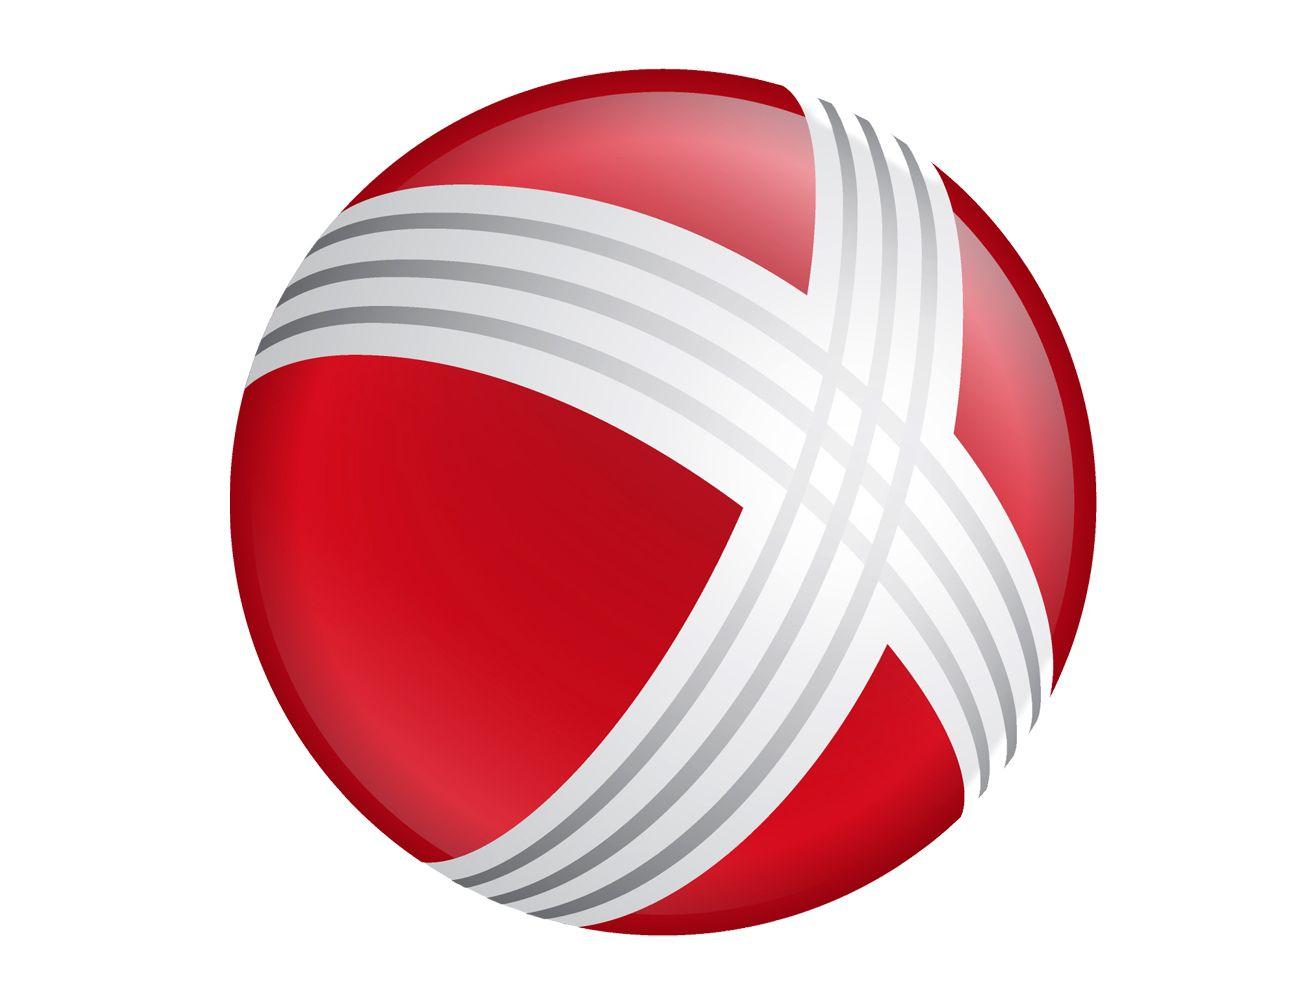 Red and White Ball Logo - Xerox Logo, Xerox Symbol, Meaning, History and Evolution